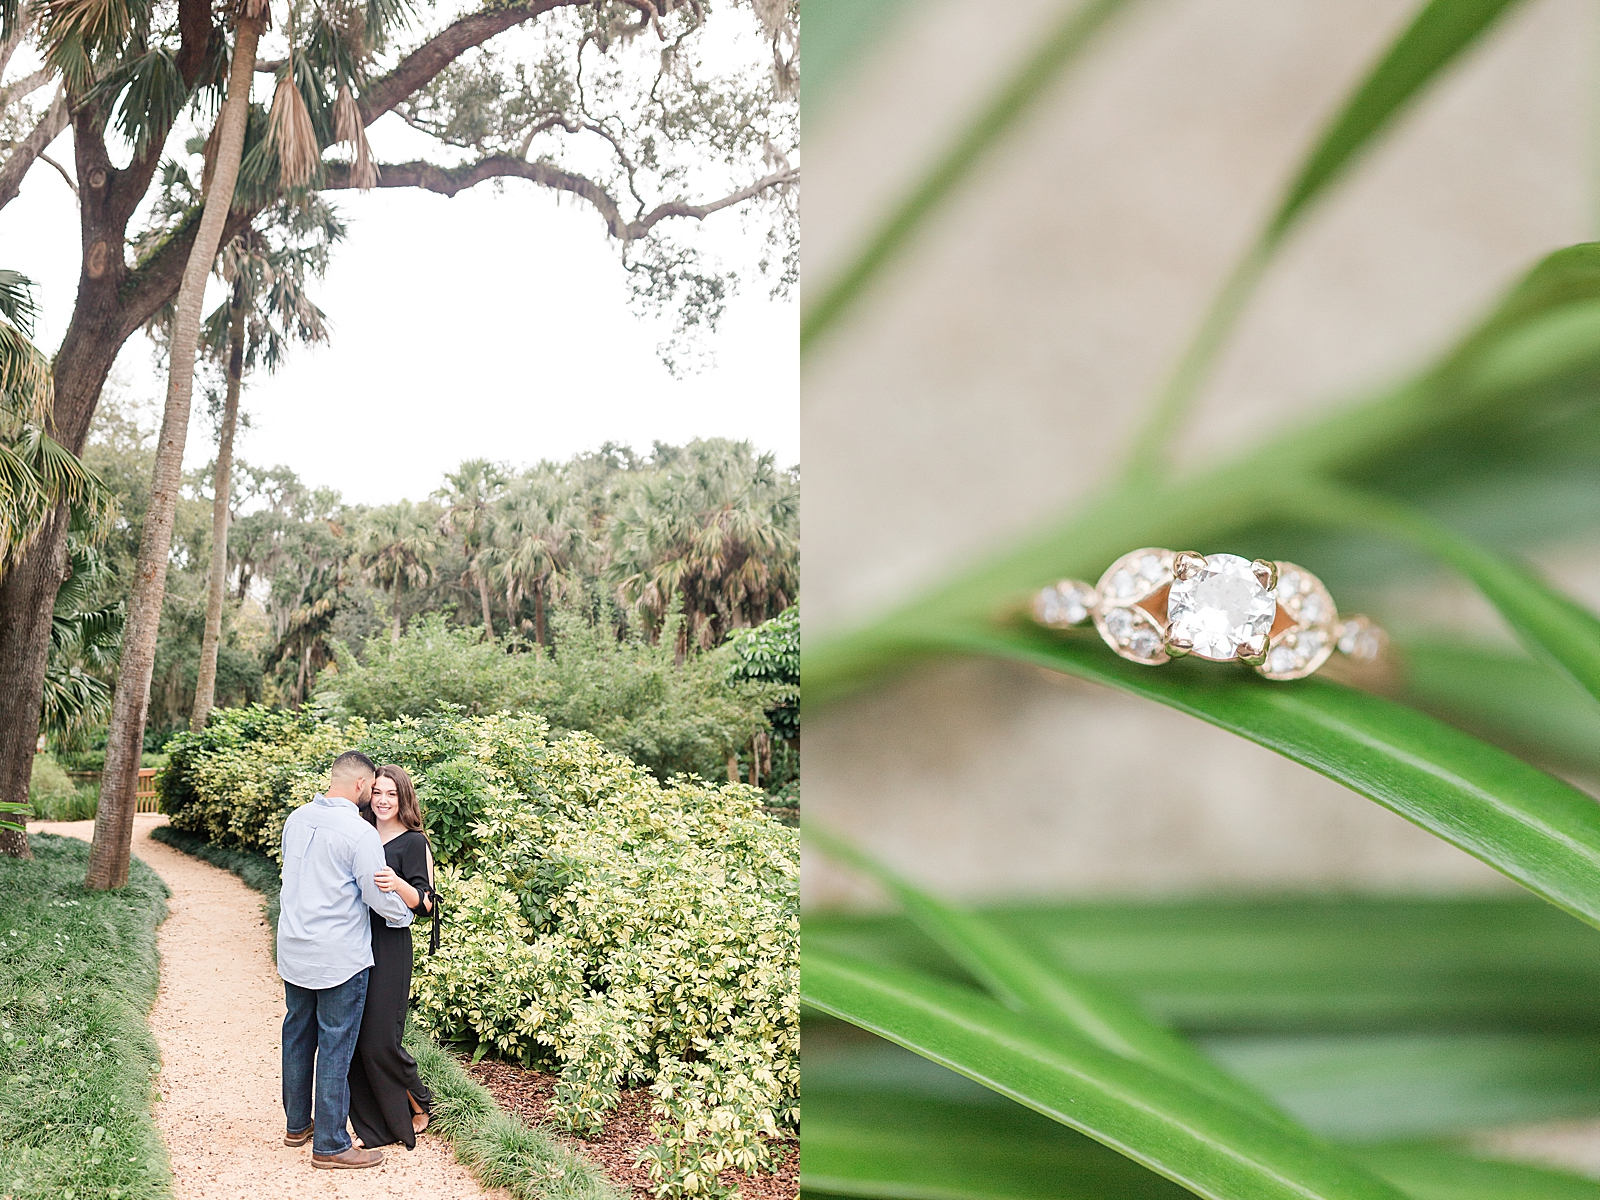 St. Augustine Engagement Nick and Chloe snuggling and detail of engagement ring Photos